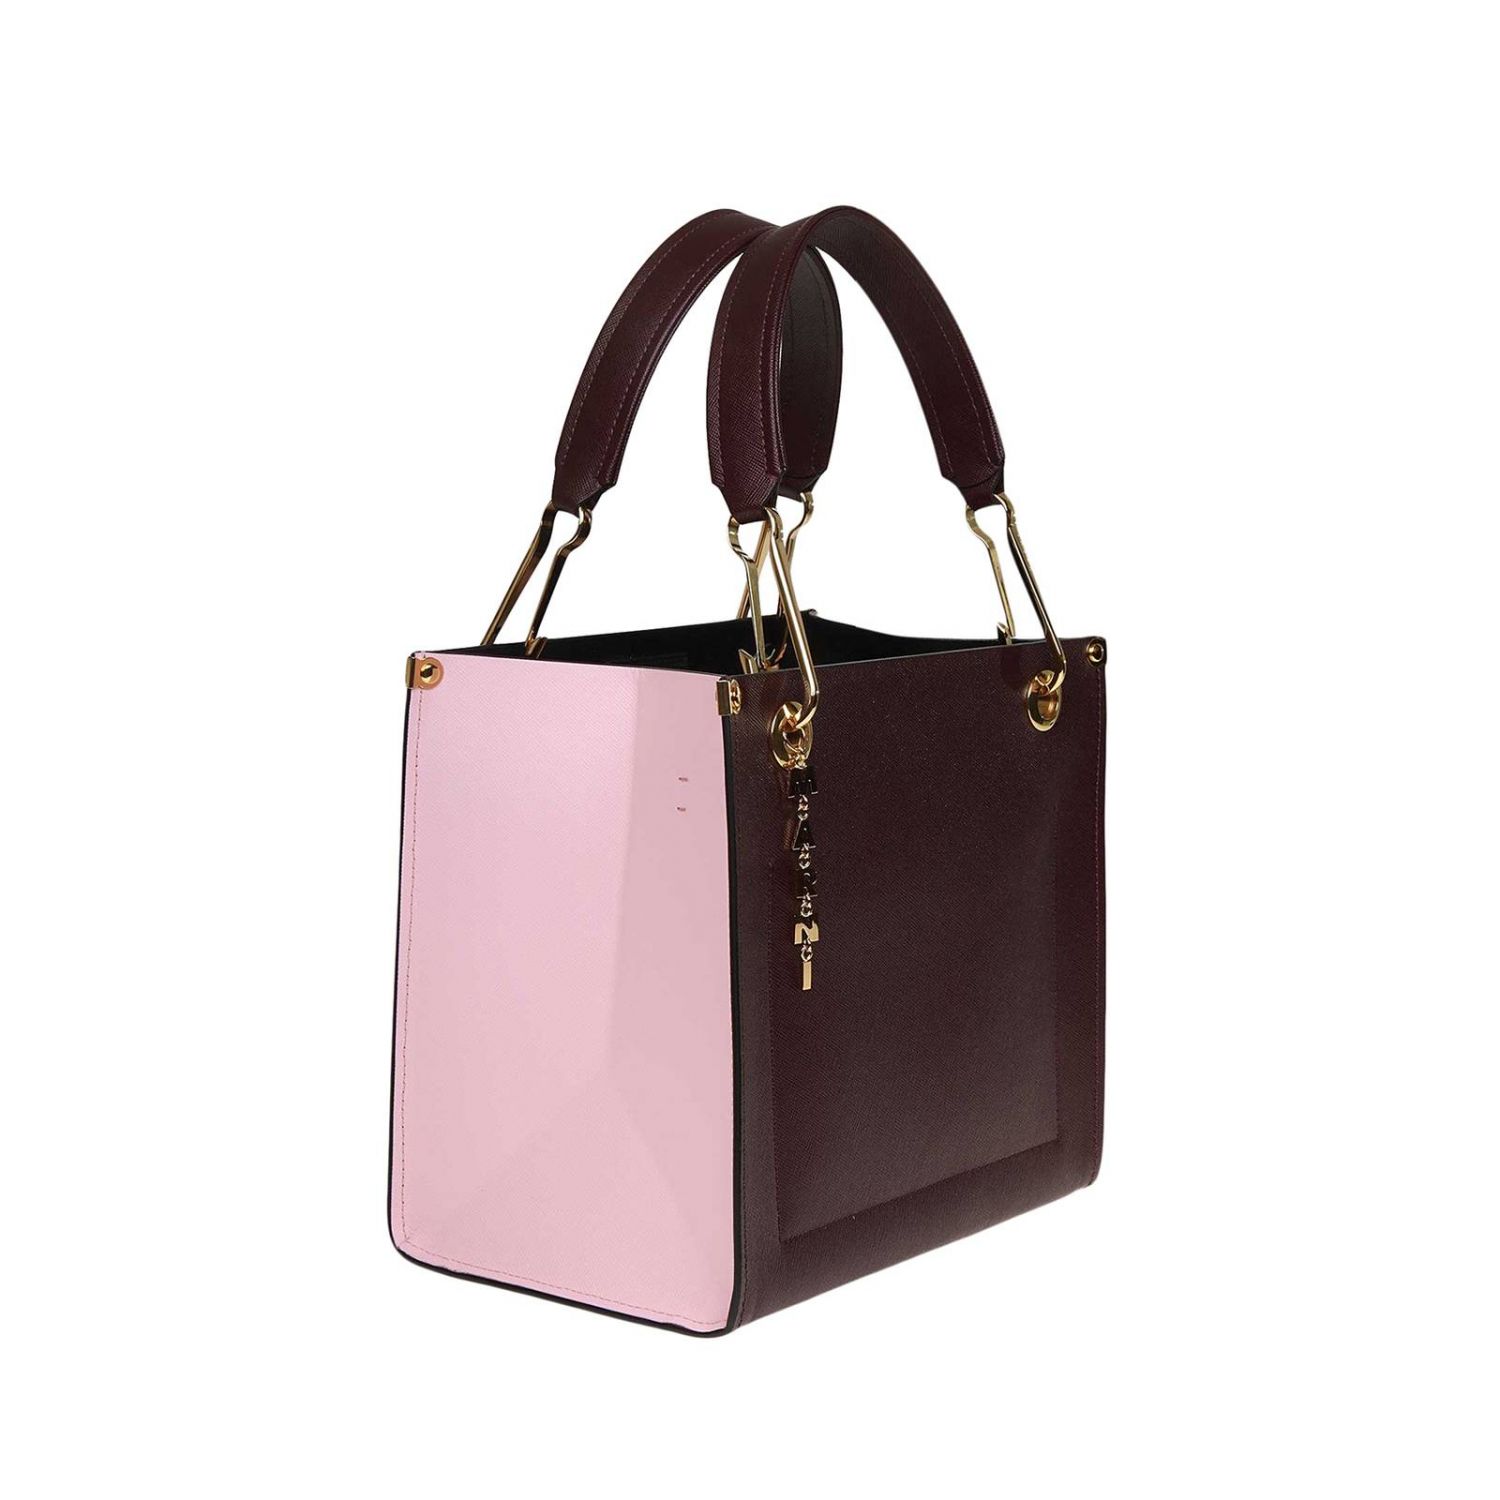 Marni Outlet: tote bag in bicolor leather with double handles - Wine